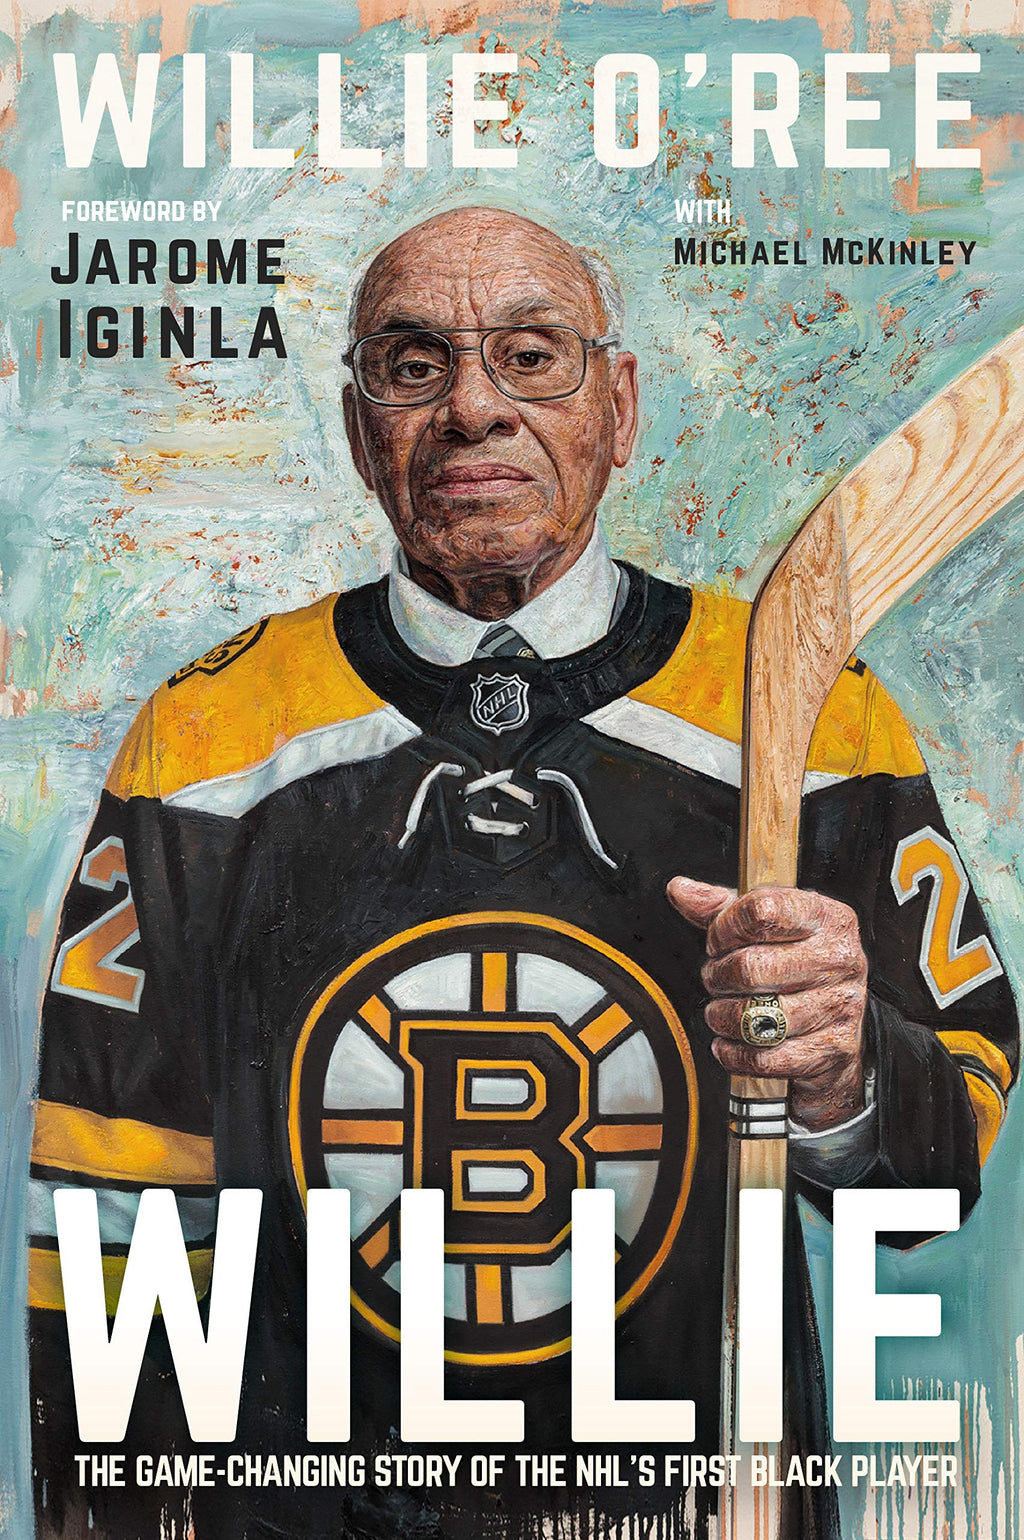 Willie: The Game-Changing Story of the NHL's First Black Player Hardcover written by Willie O'Ree, Jarome Iginla (Foreword) - Best Book Store